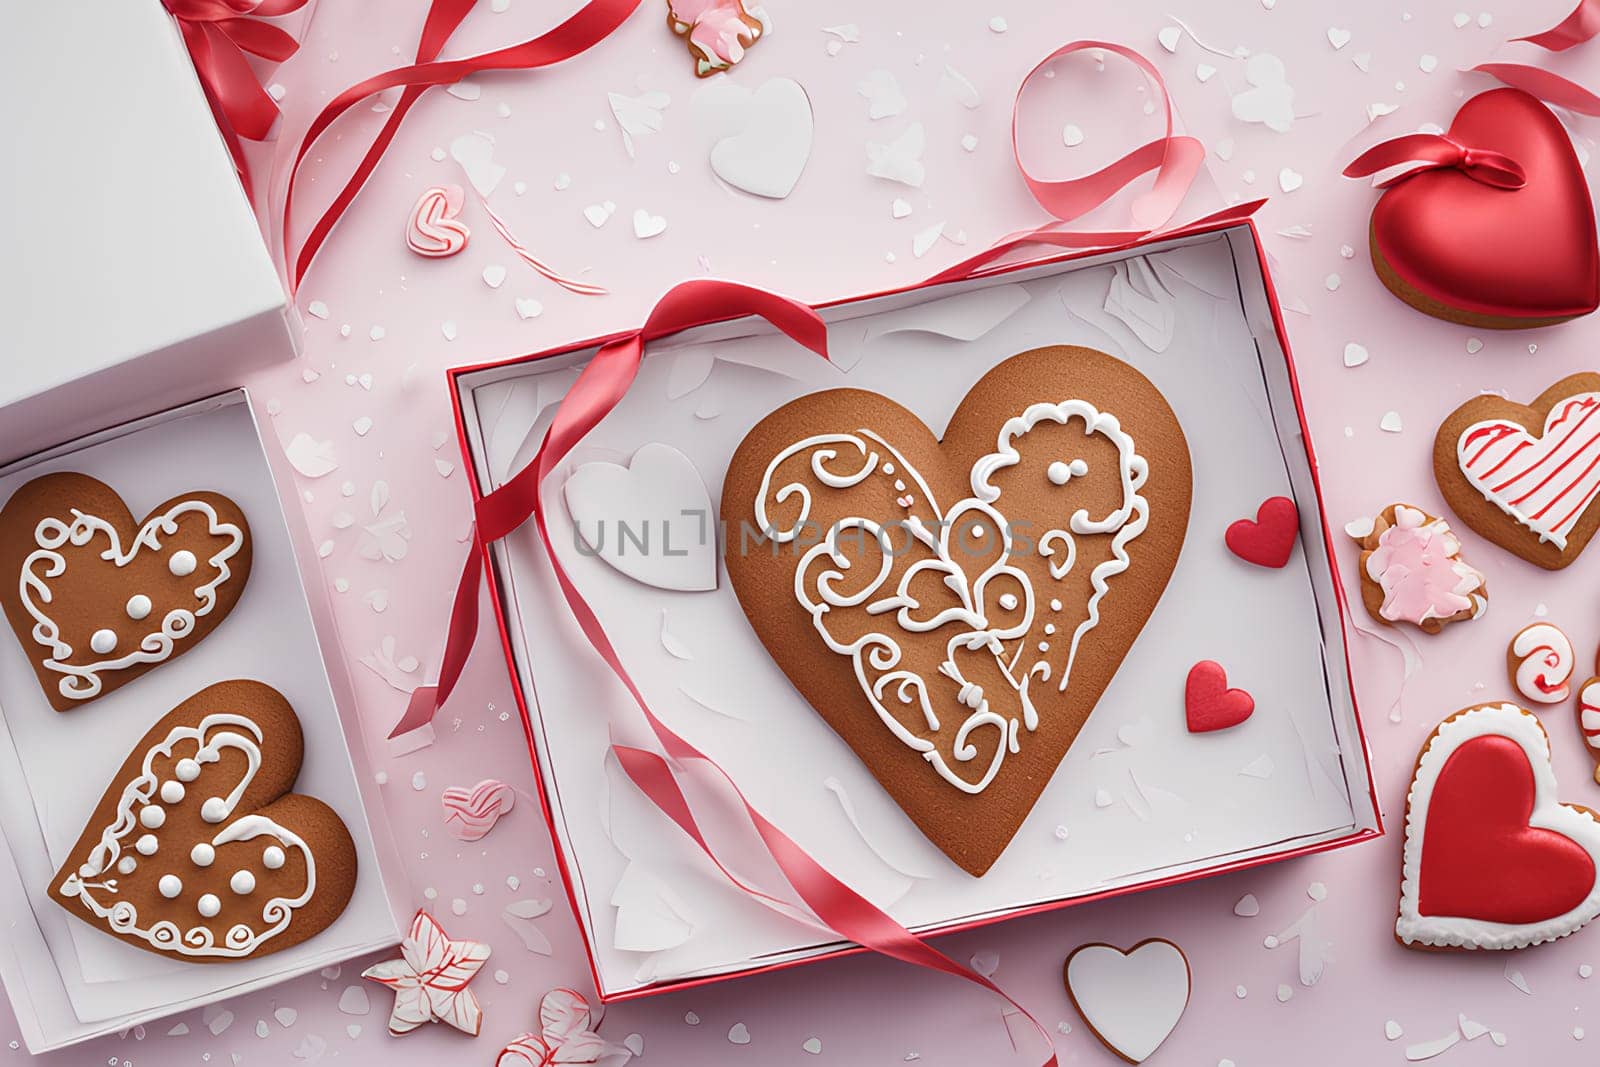 Gingerbread in the shape of a heart for Valentine's Day. by Annu1tochka